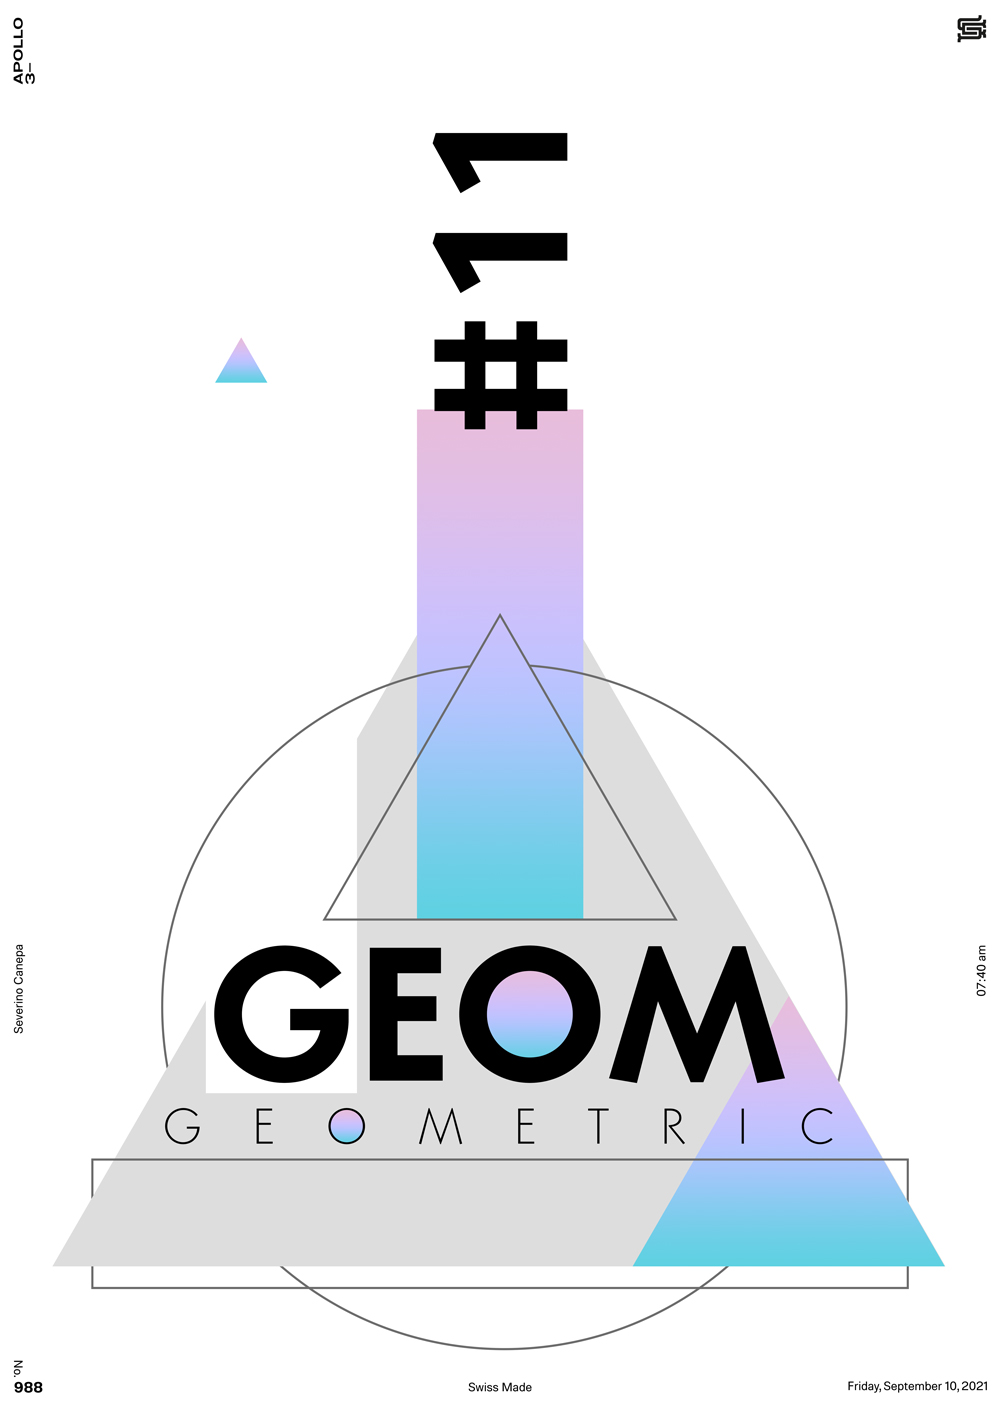 Geometric creation made with typefaces and basic forms